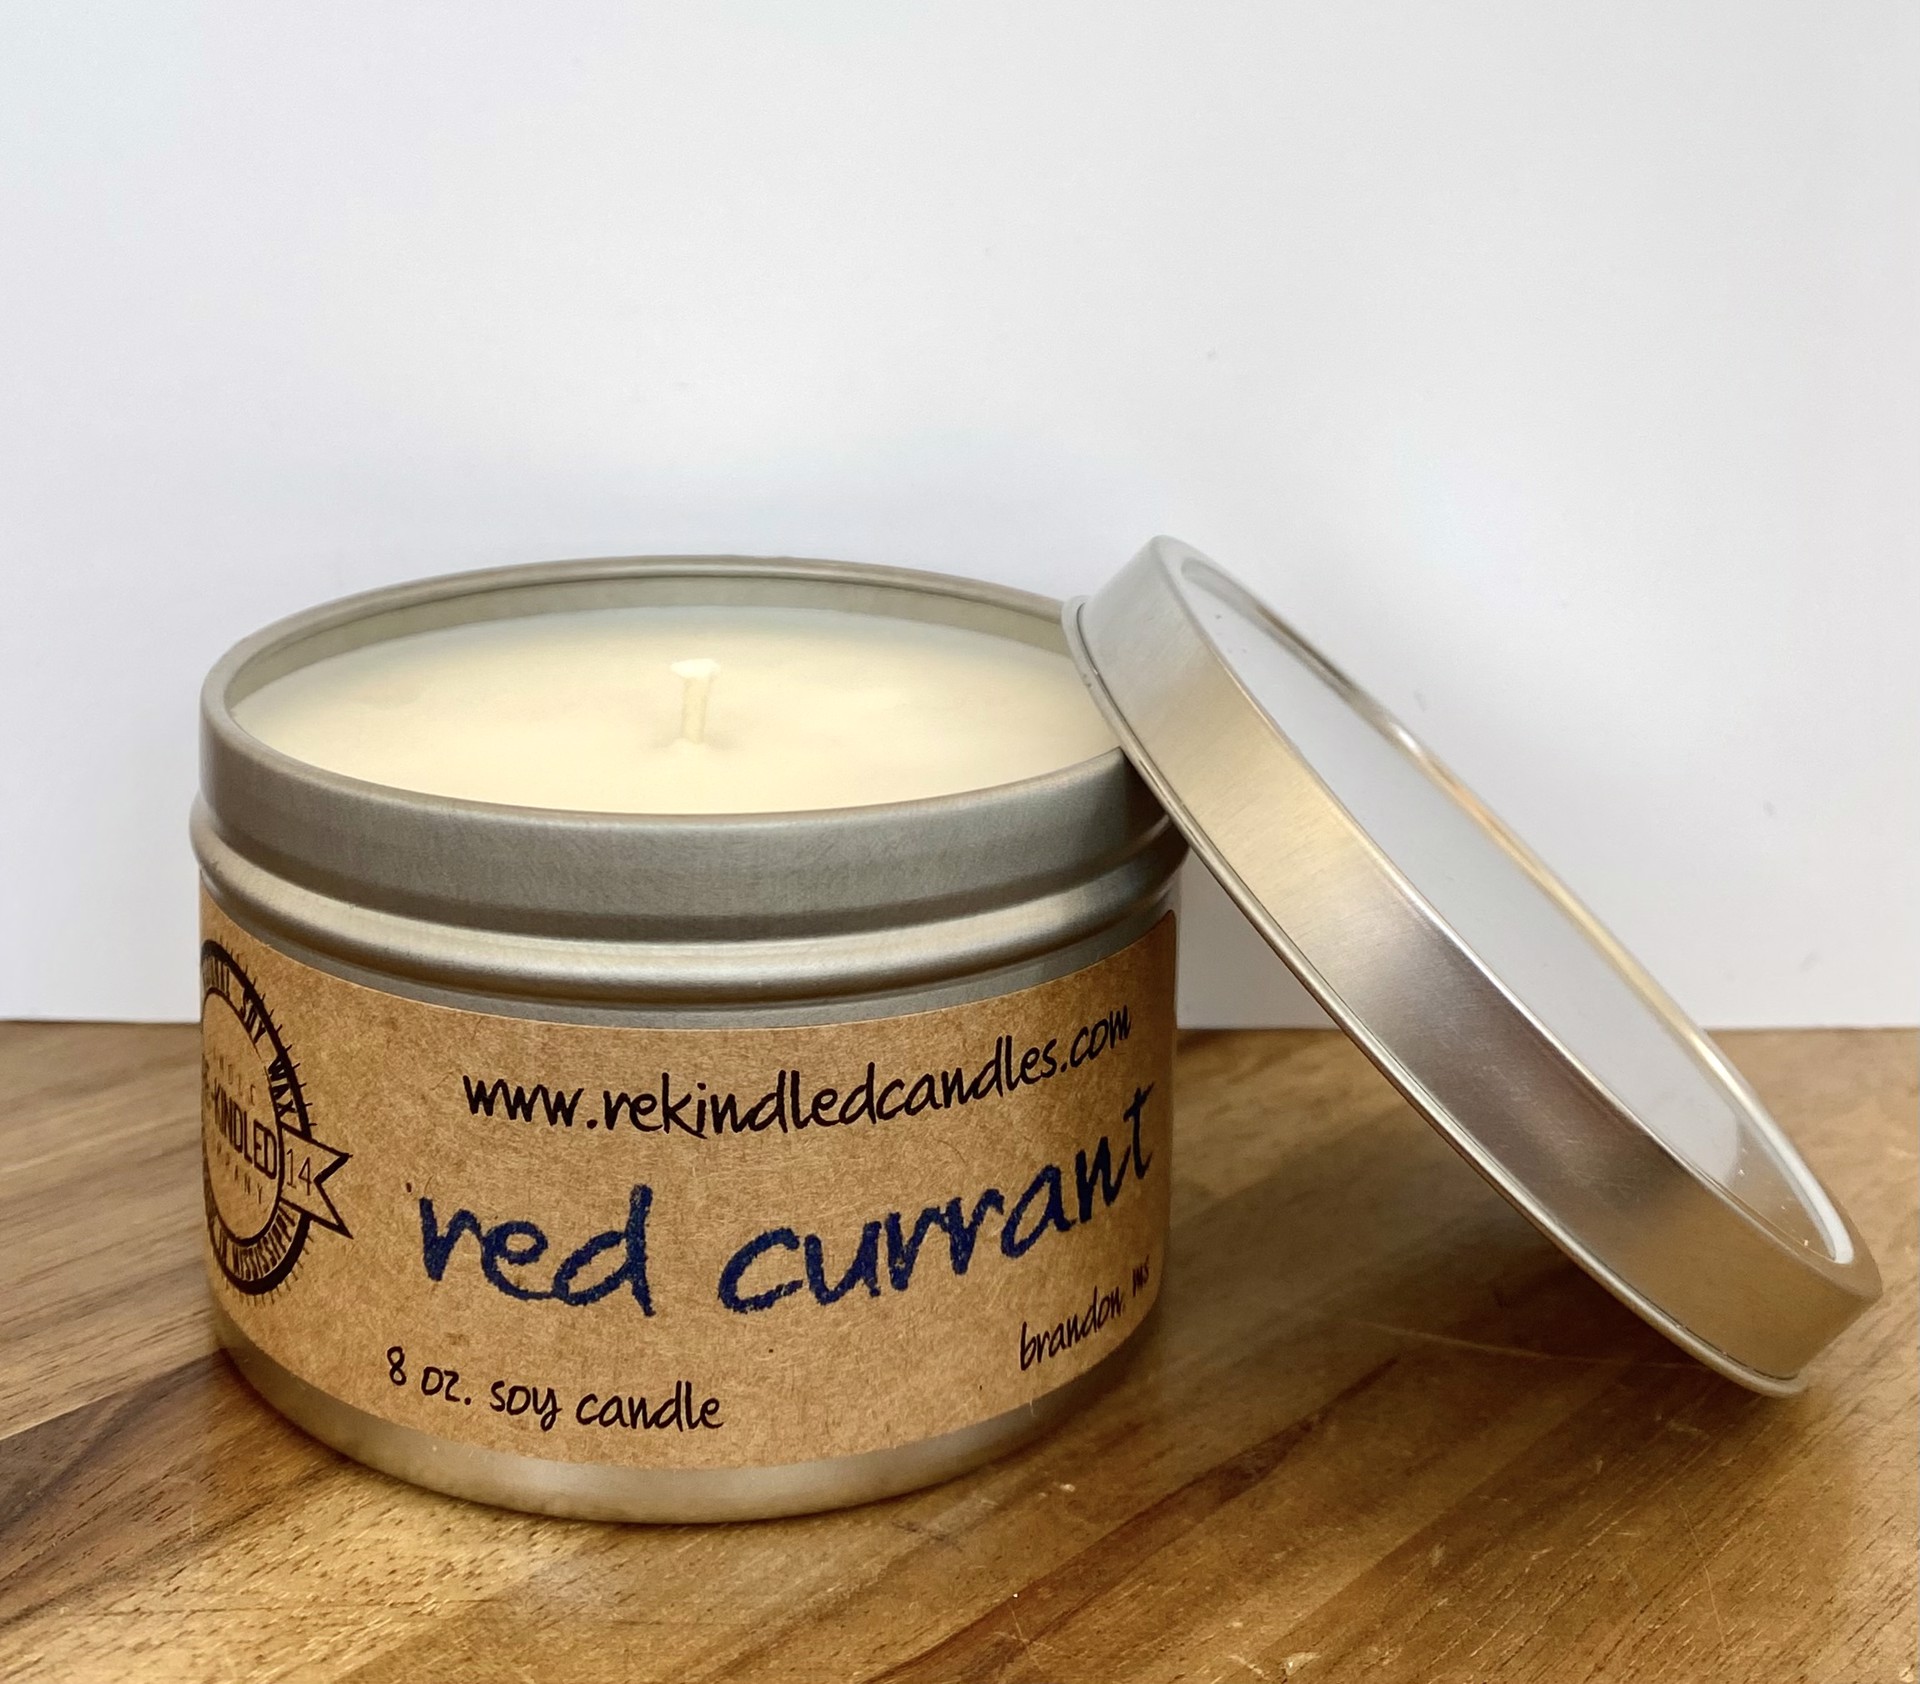 Red Currant Candle Tin by re-kindled candle company